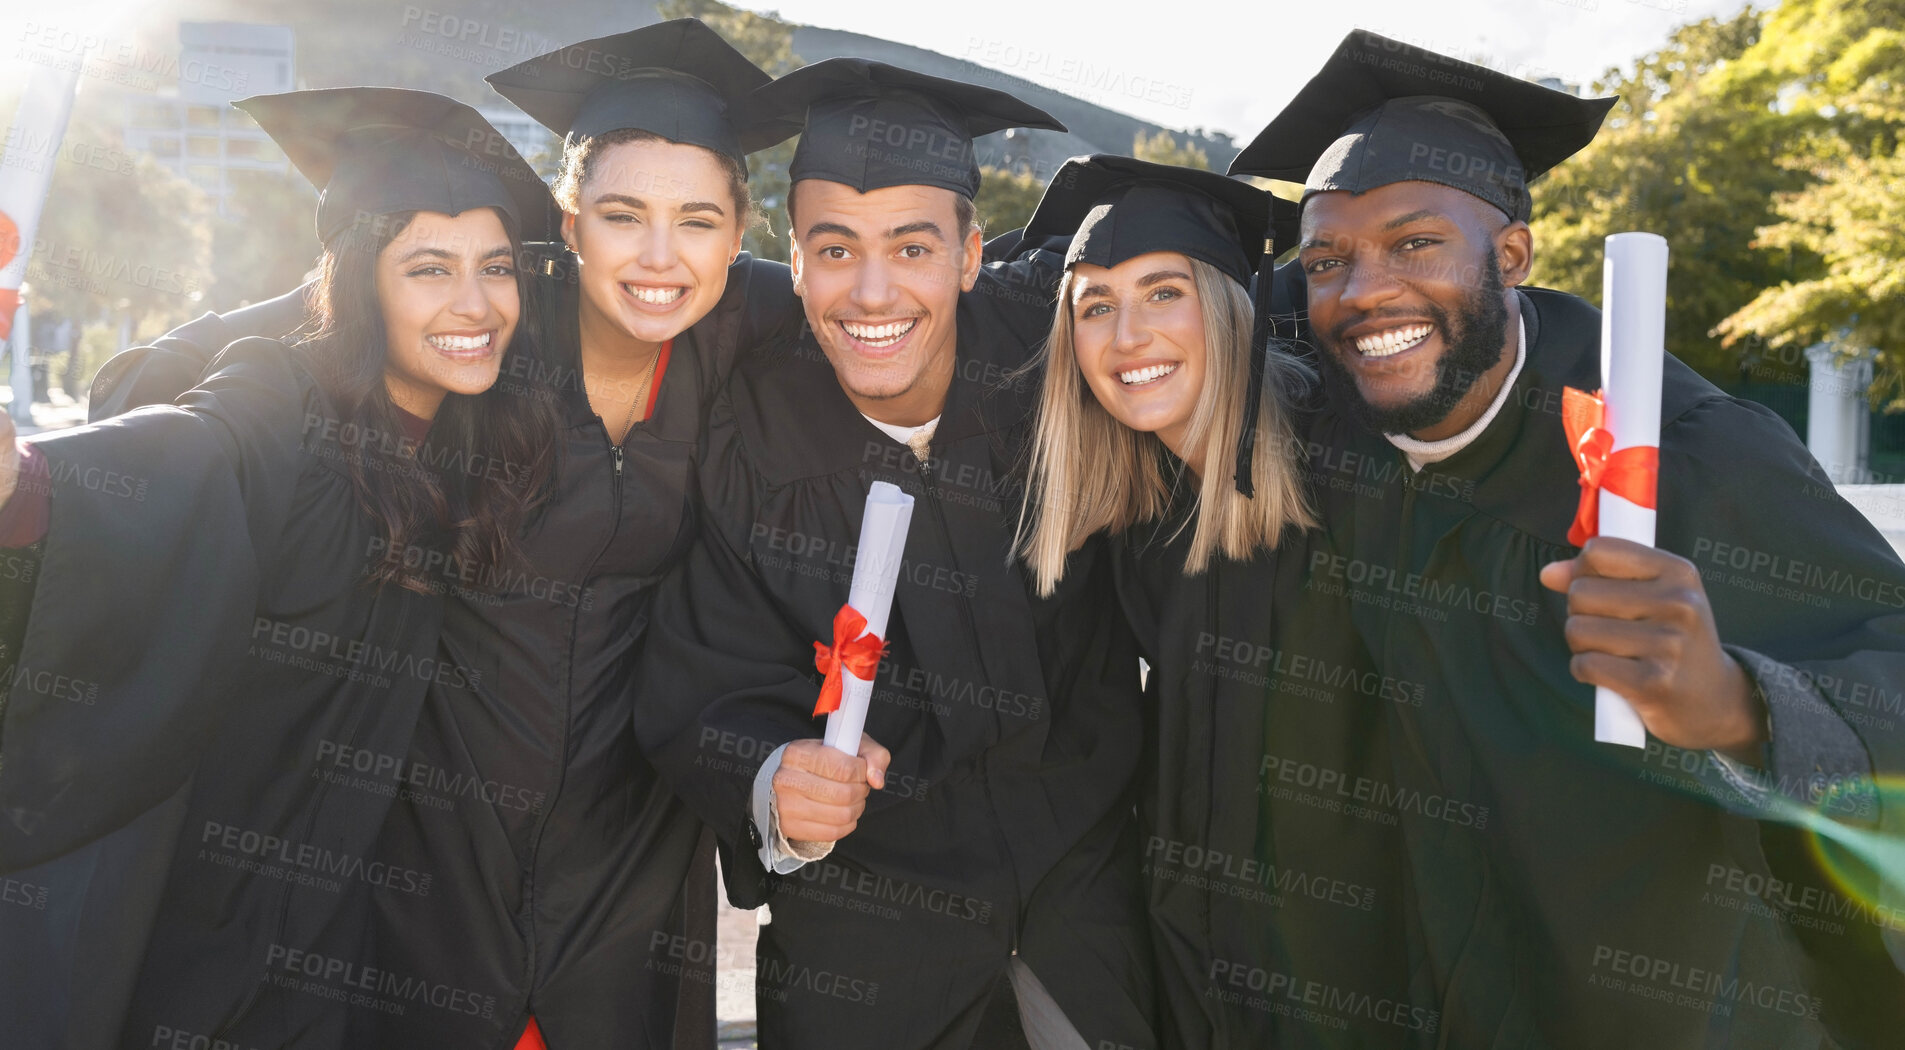 Buy stock photo Graduation, happy group and portrait of students celebrate education success. Diversity of excited graduates smile outdoor at campus celebration for study goals, university award and college friends